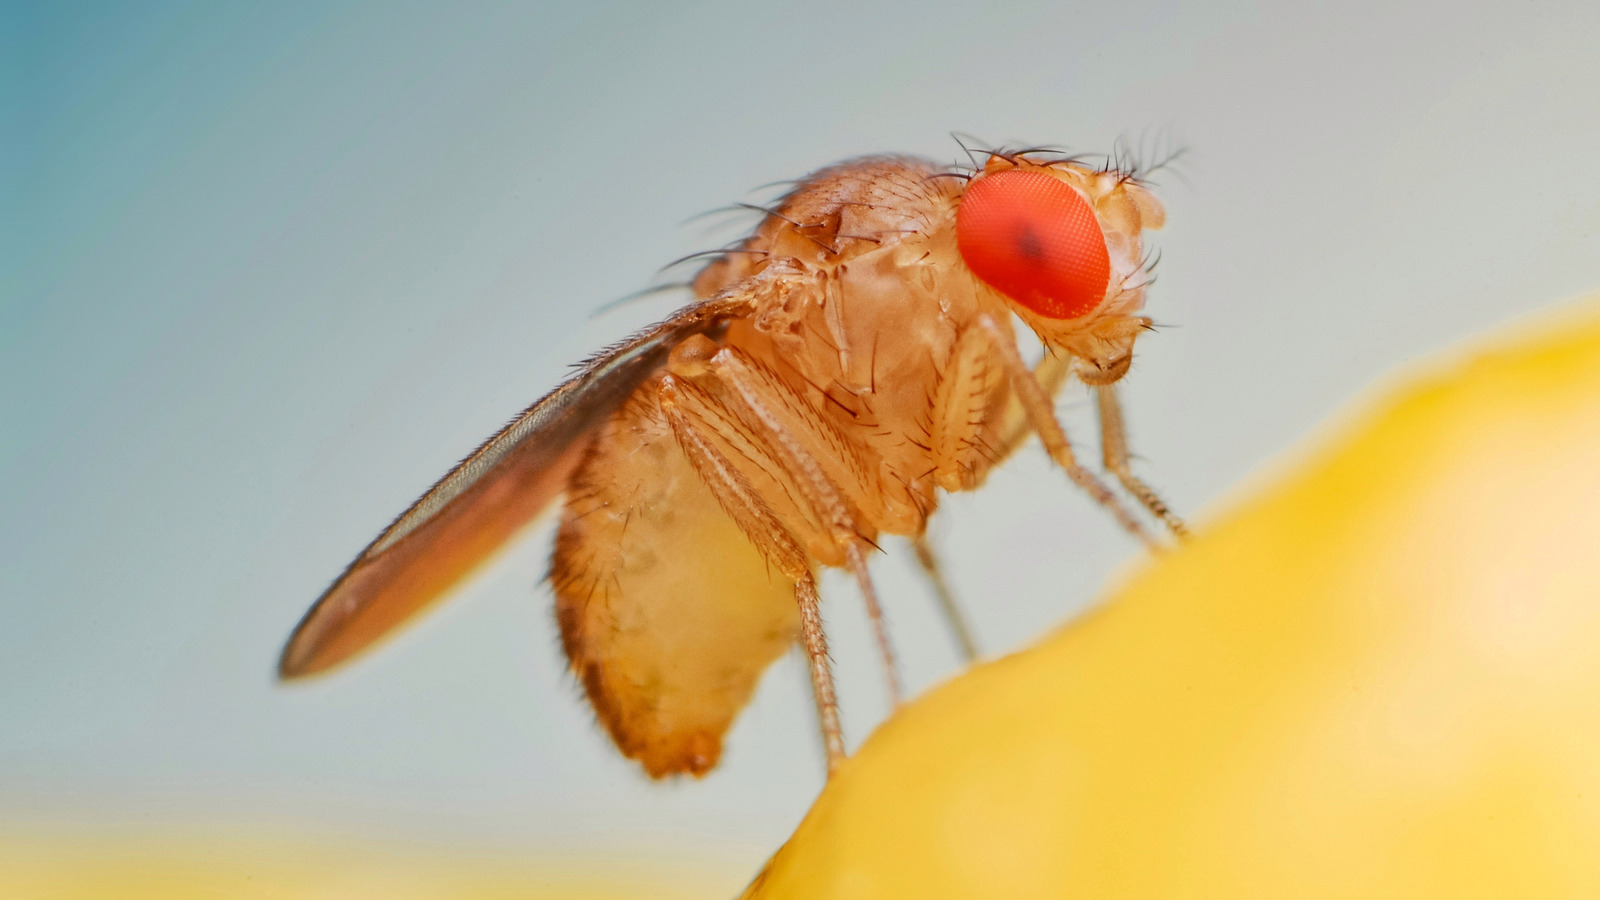 How to Get Rid of Fruit Flies in the House: 9 Effective Ways